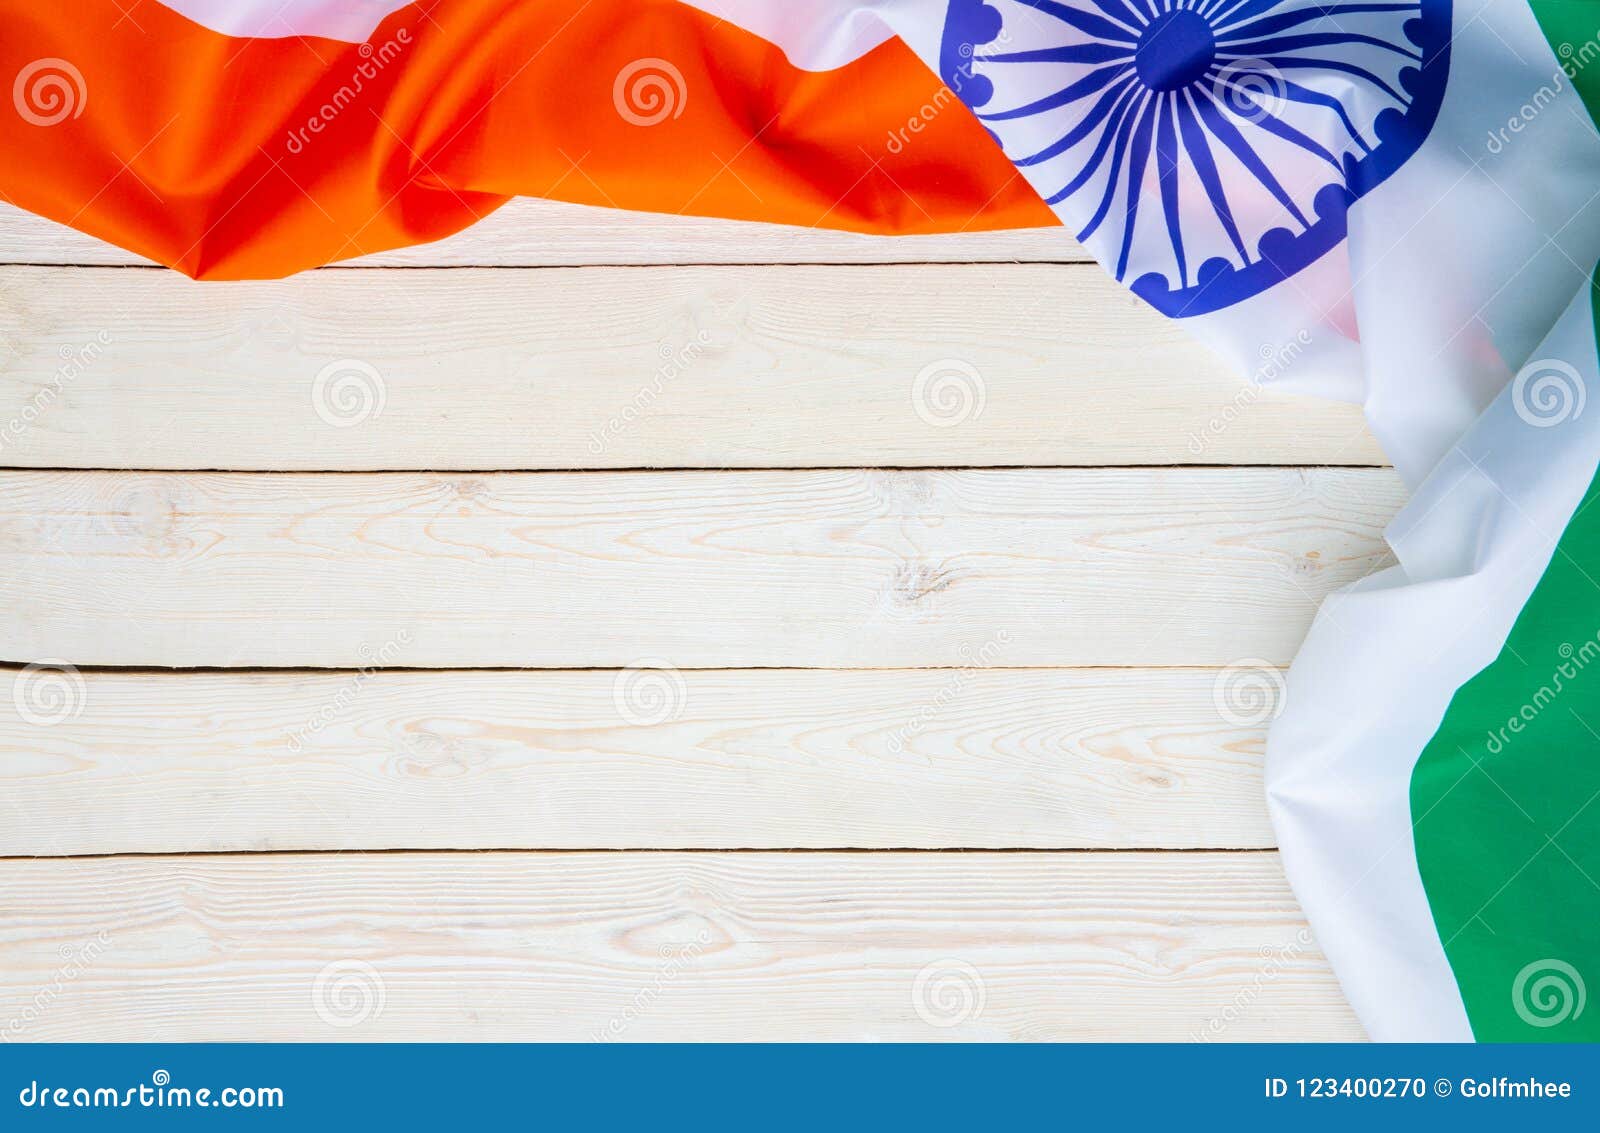 India Flag on Wood Texture Background Concept for 15 August Independence  Day Wallpaper, Happy 26 January Republic Day Banner Stock Photo - Image of  international, holiday: 123400270